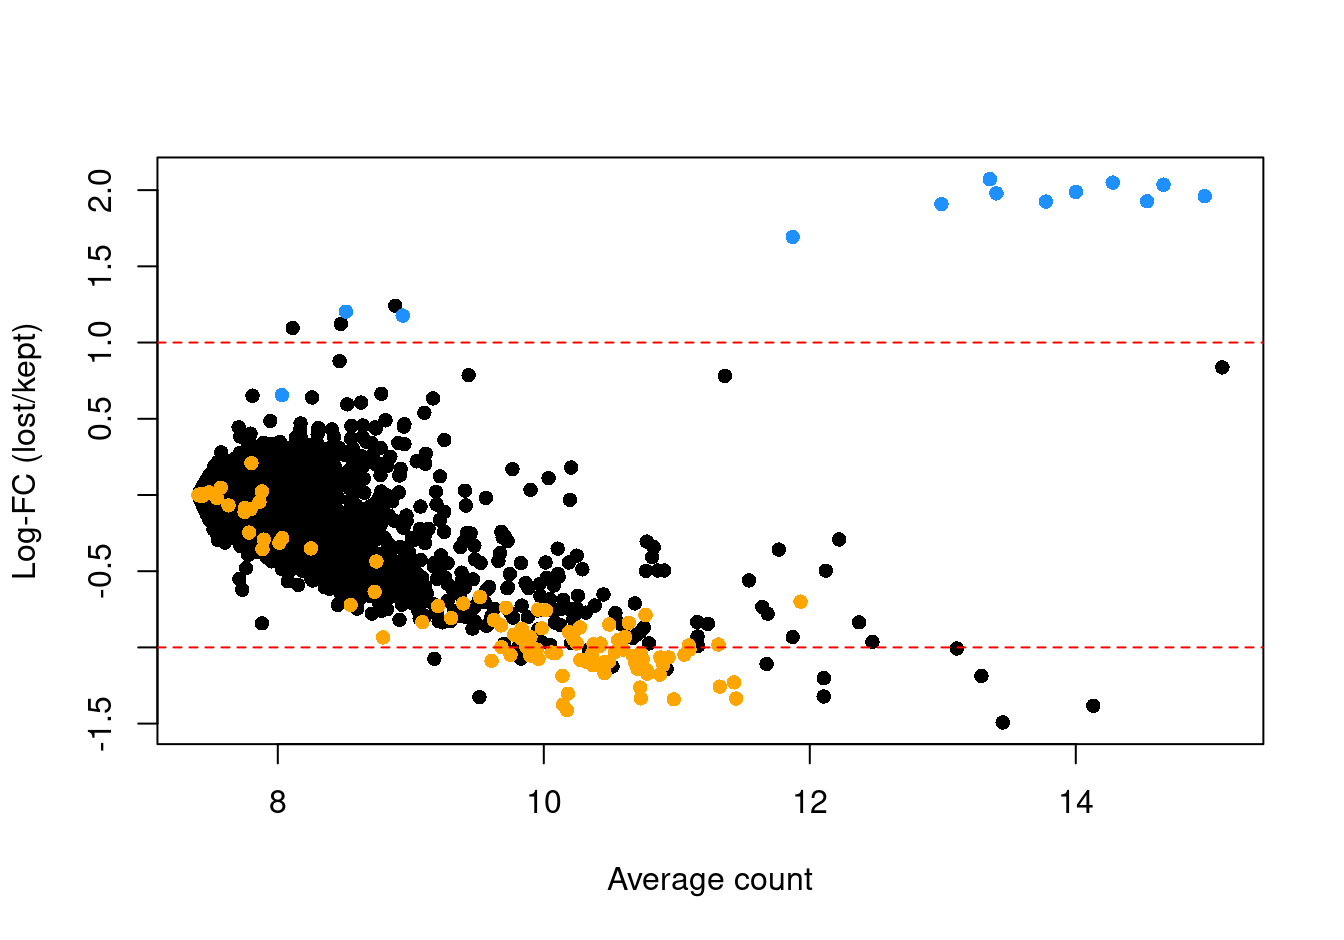 Log-fold change in expression in the discarded cells compared to the retained cells. Each point represents a gene with mitochondrial transcripts in blue and ribosomal protein genes in orange. Dashed red lines indicate $|logFC| = 1